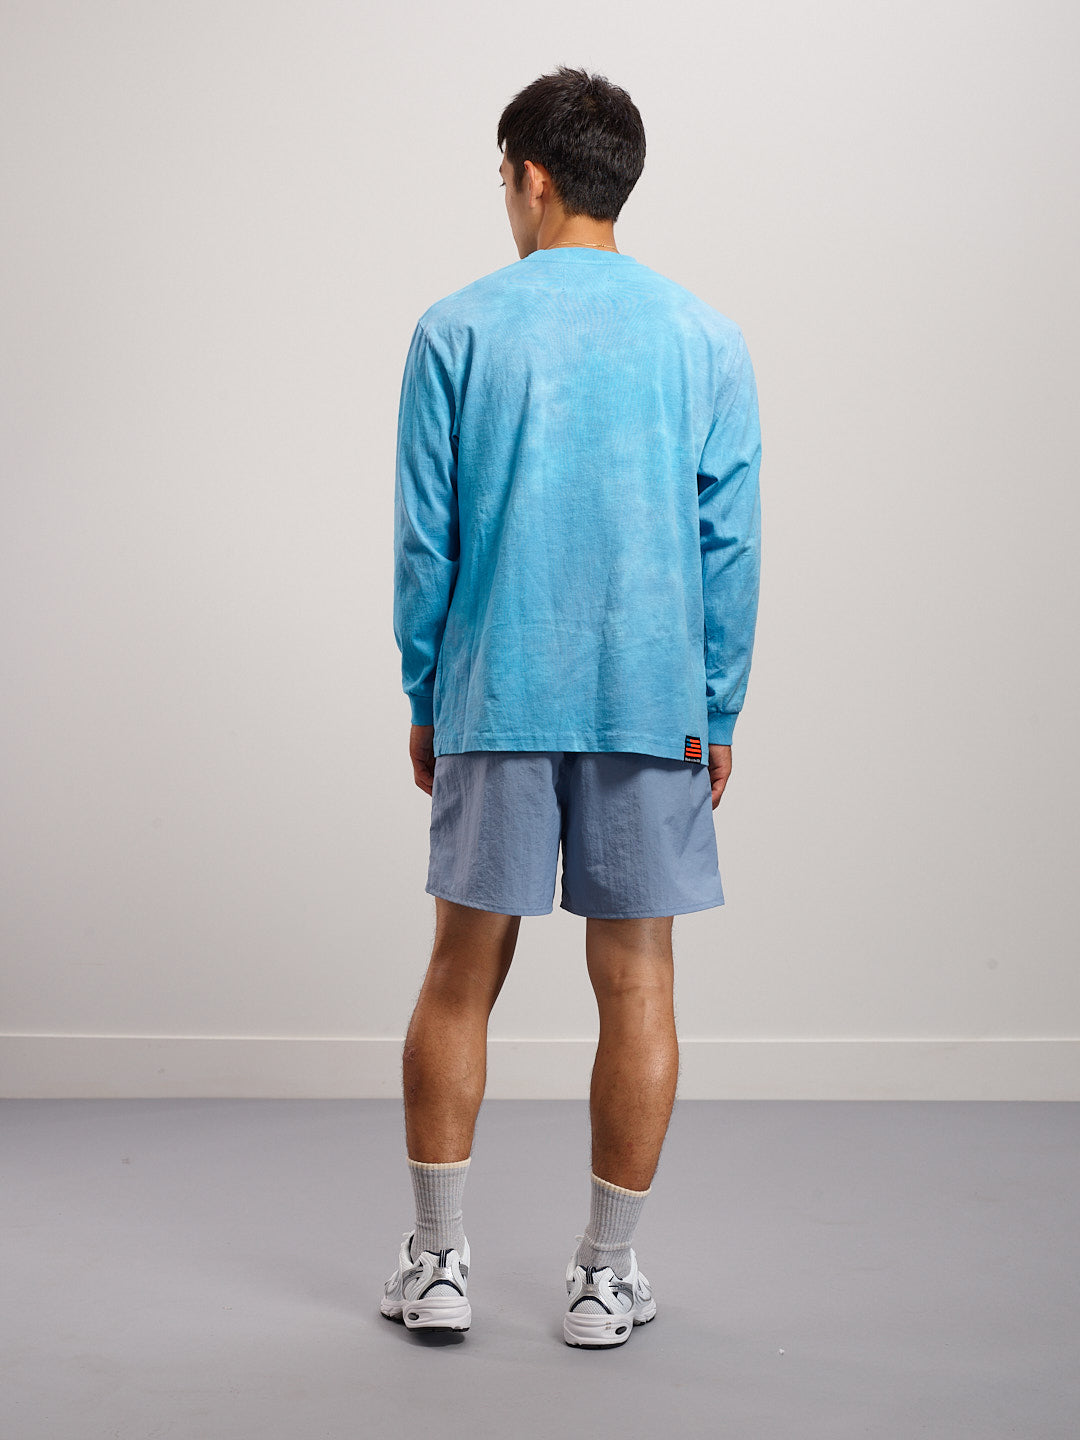 Long Sleeve Tee - Cloudy Washed Blue